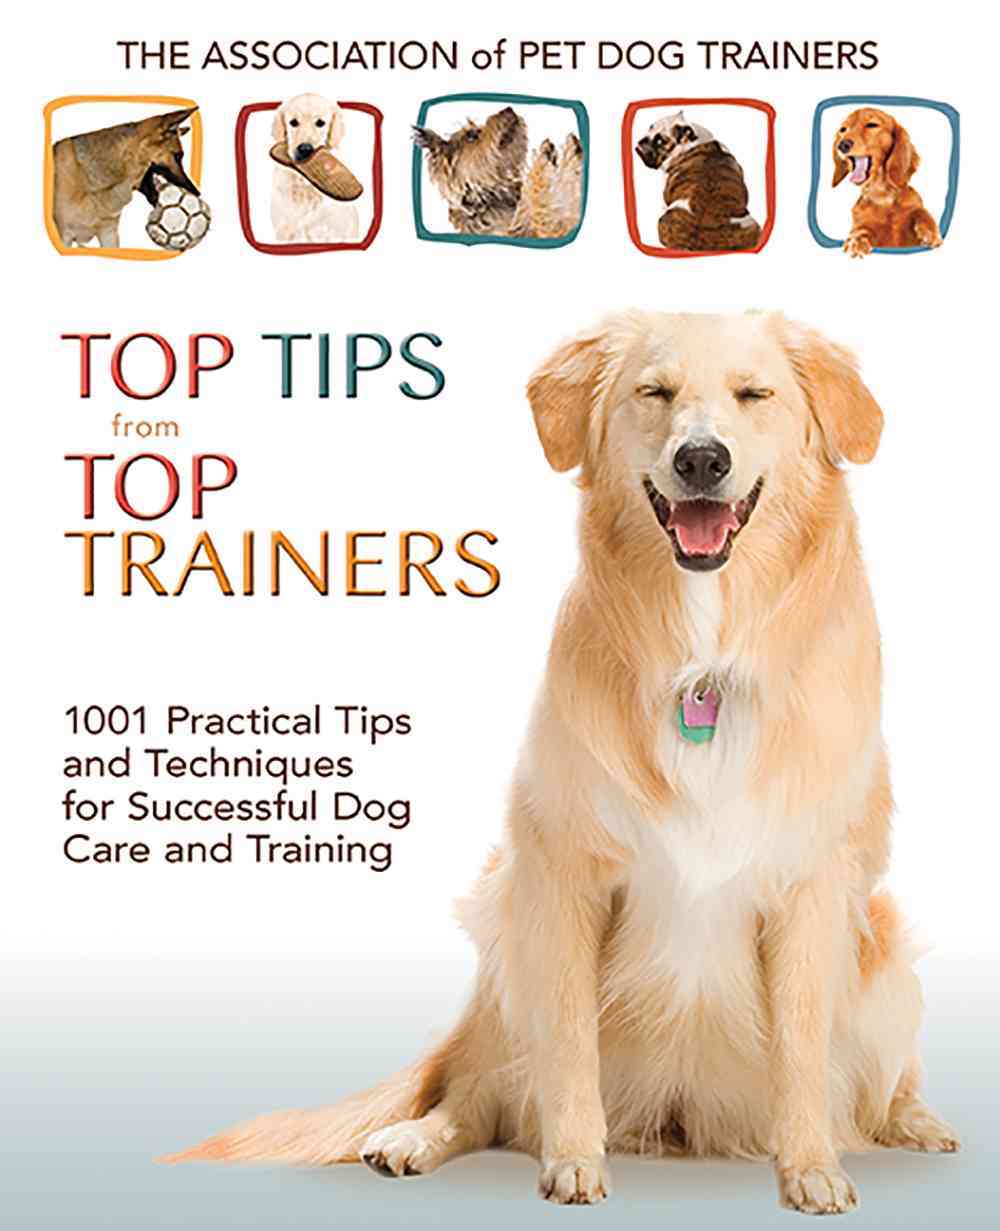 The Association of Pet Dog Trainers Top Tips from Top Trainers: 1001 Practical Tips and Techniques for Successful Dog Care and Training Heather Russell-Revesz, Stephanie Fornino, Joann Woy and Mary Ann Kahn